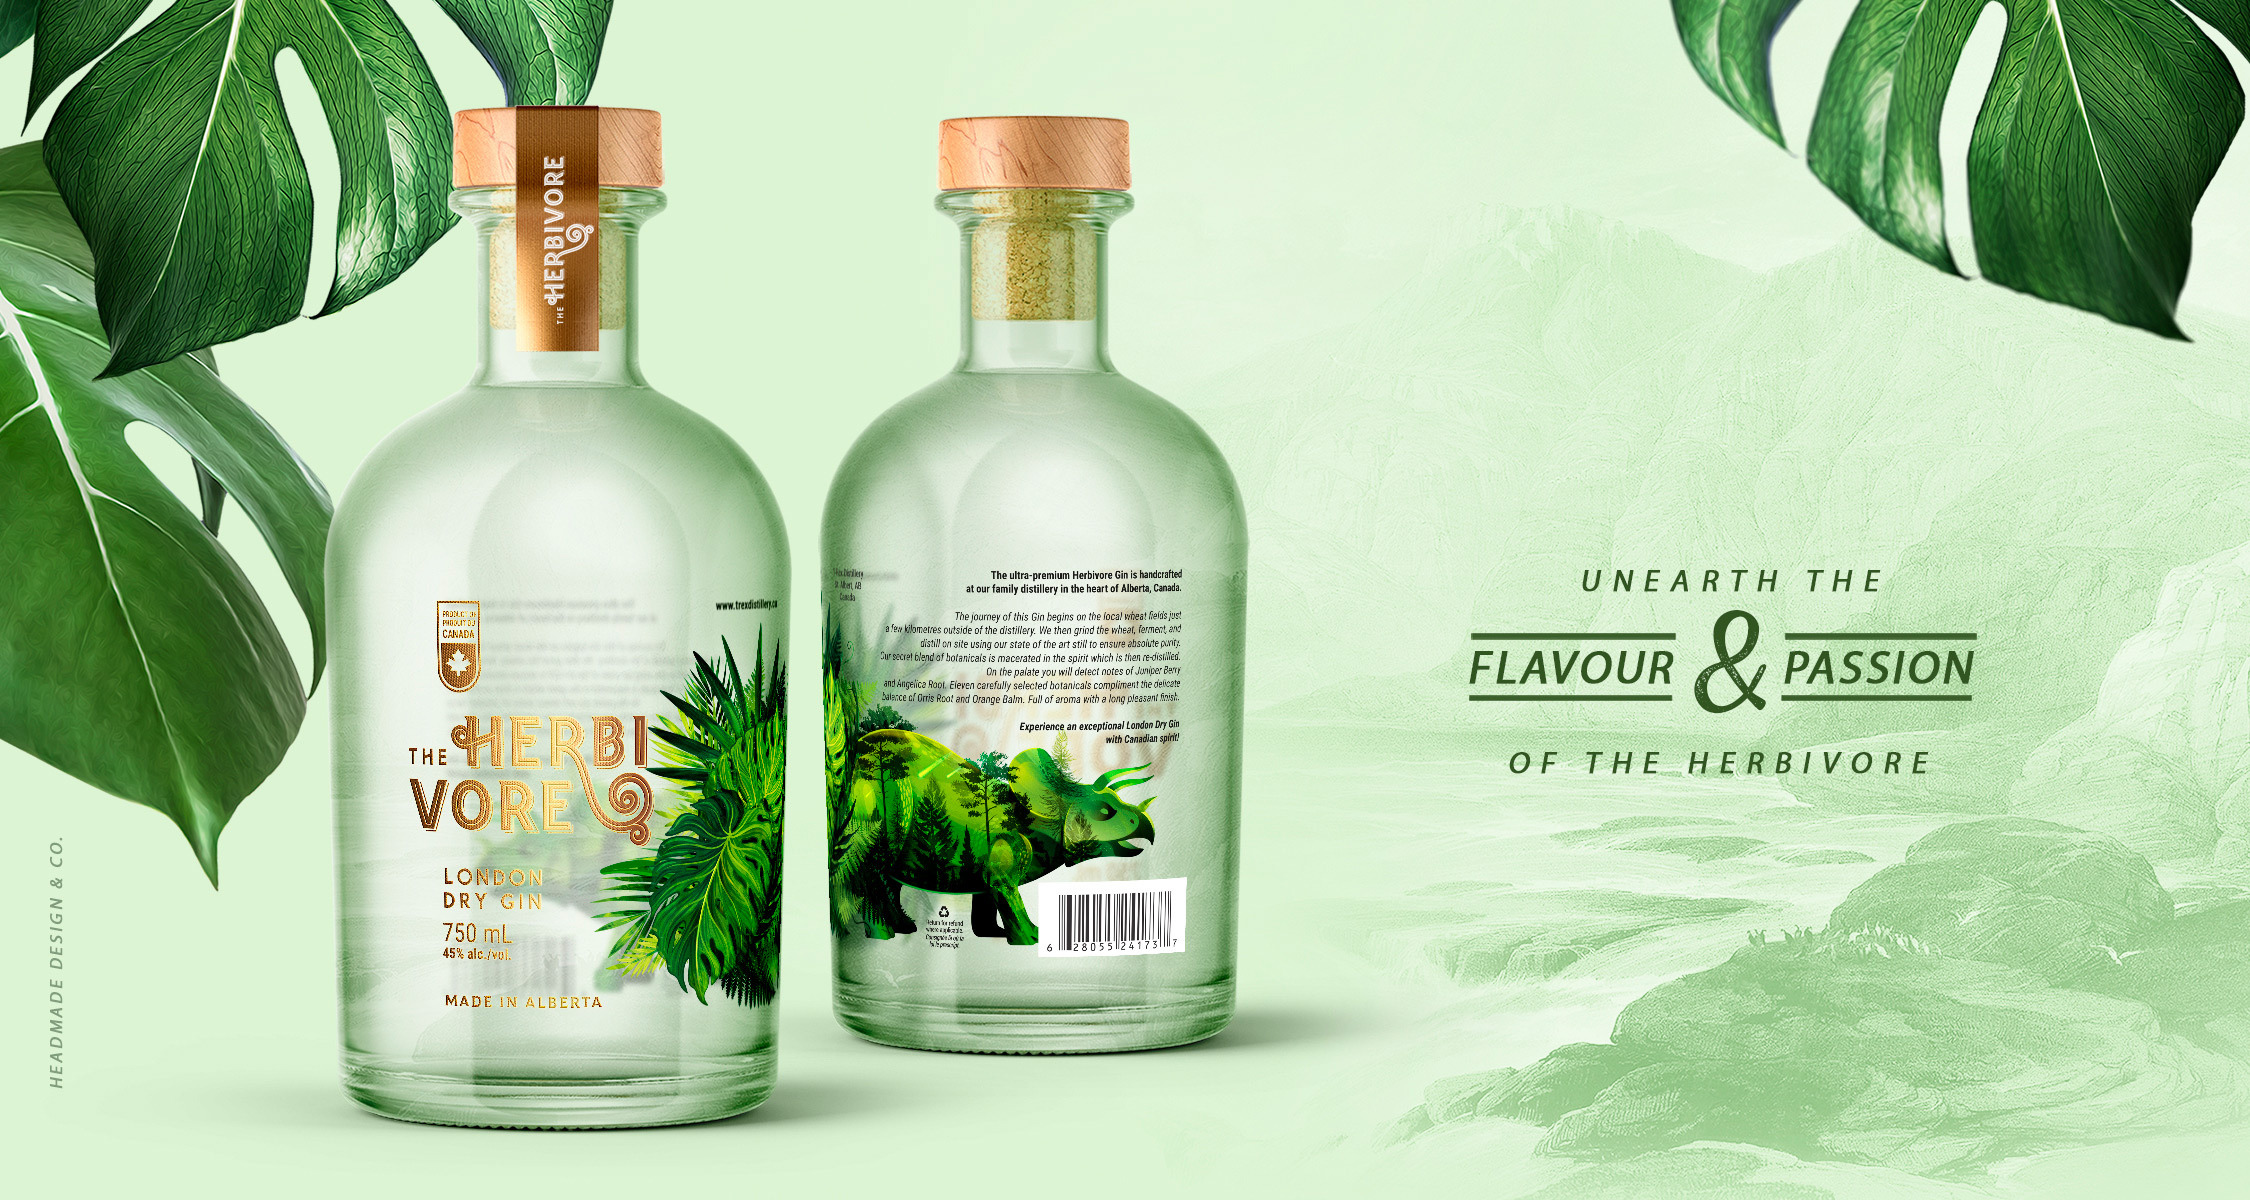 HeadMade Design & Co. Create Brand and Packaging Design for London Dry Gin The Herbivore